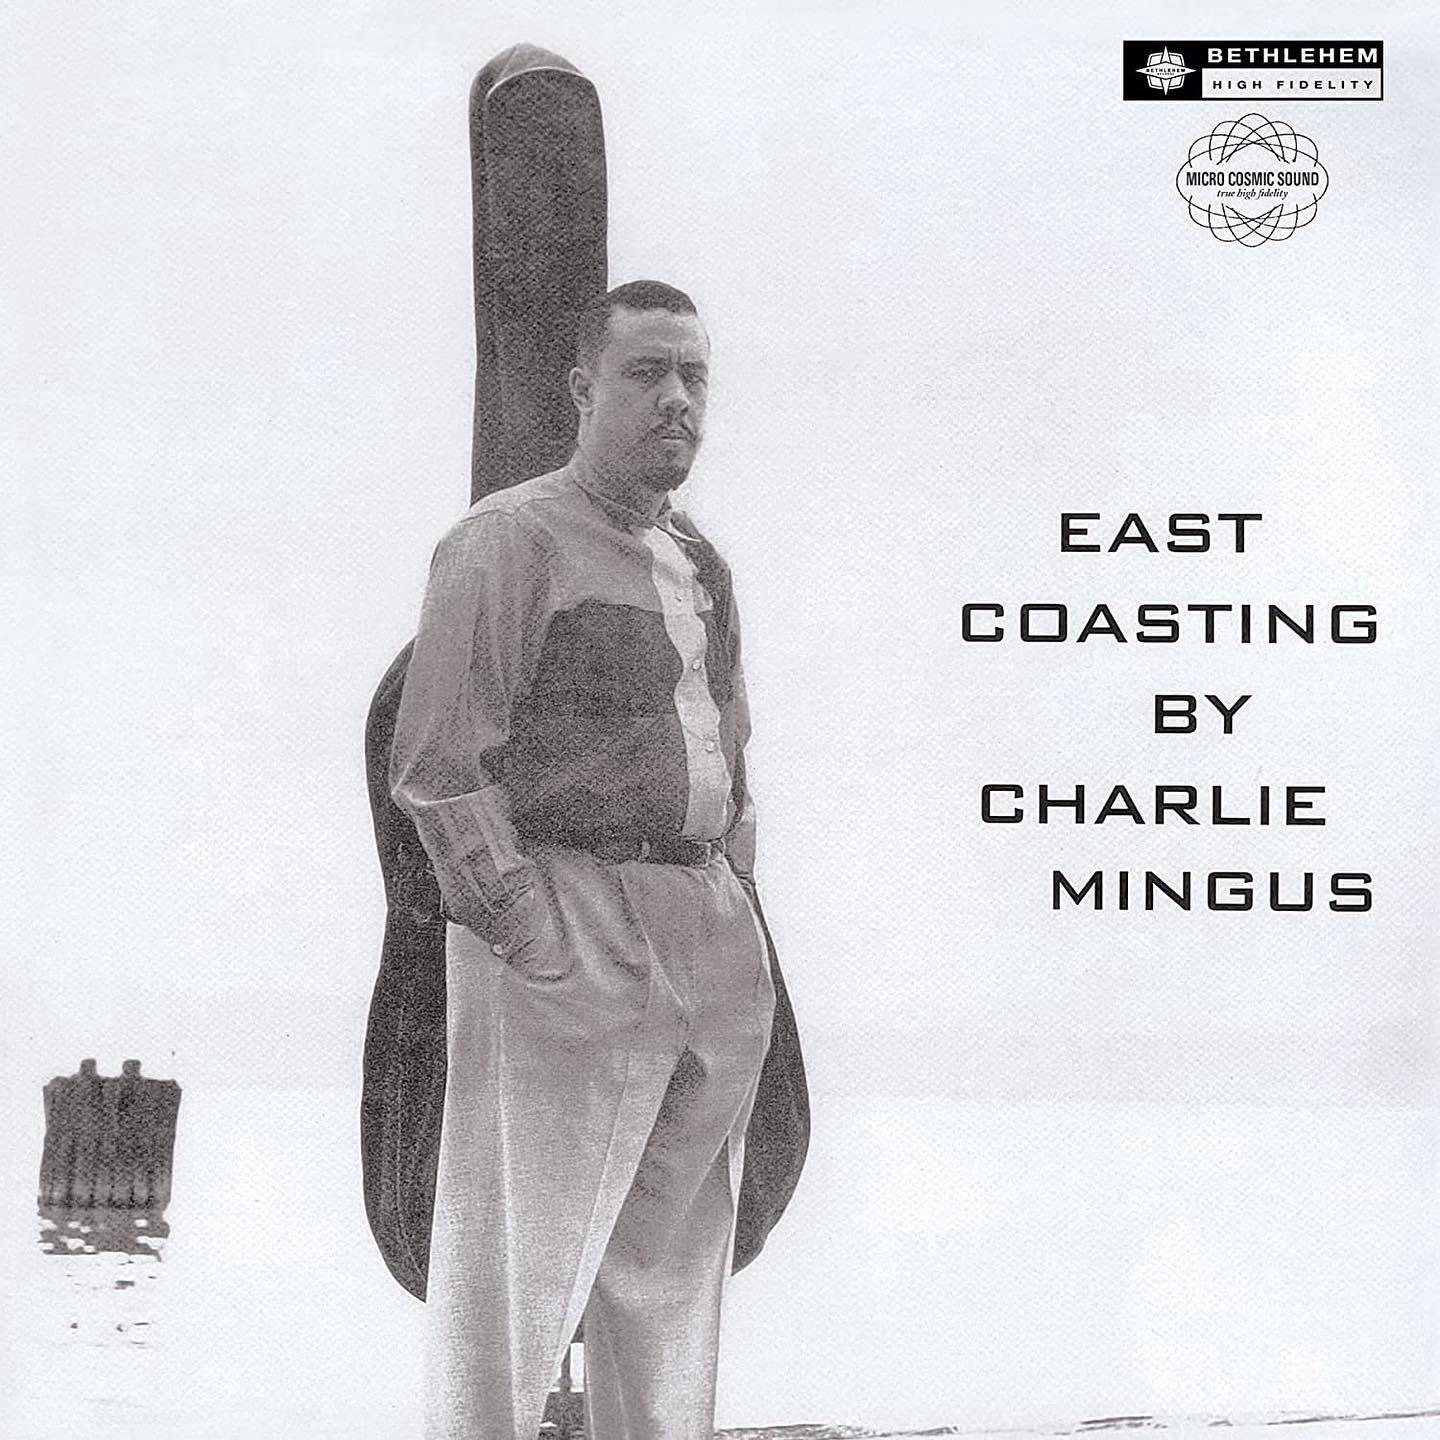 Recorded and released in 1957, East Coasting is an unpredictable and explorative album